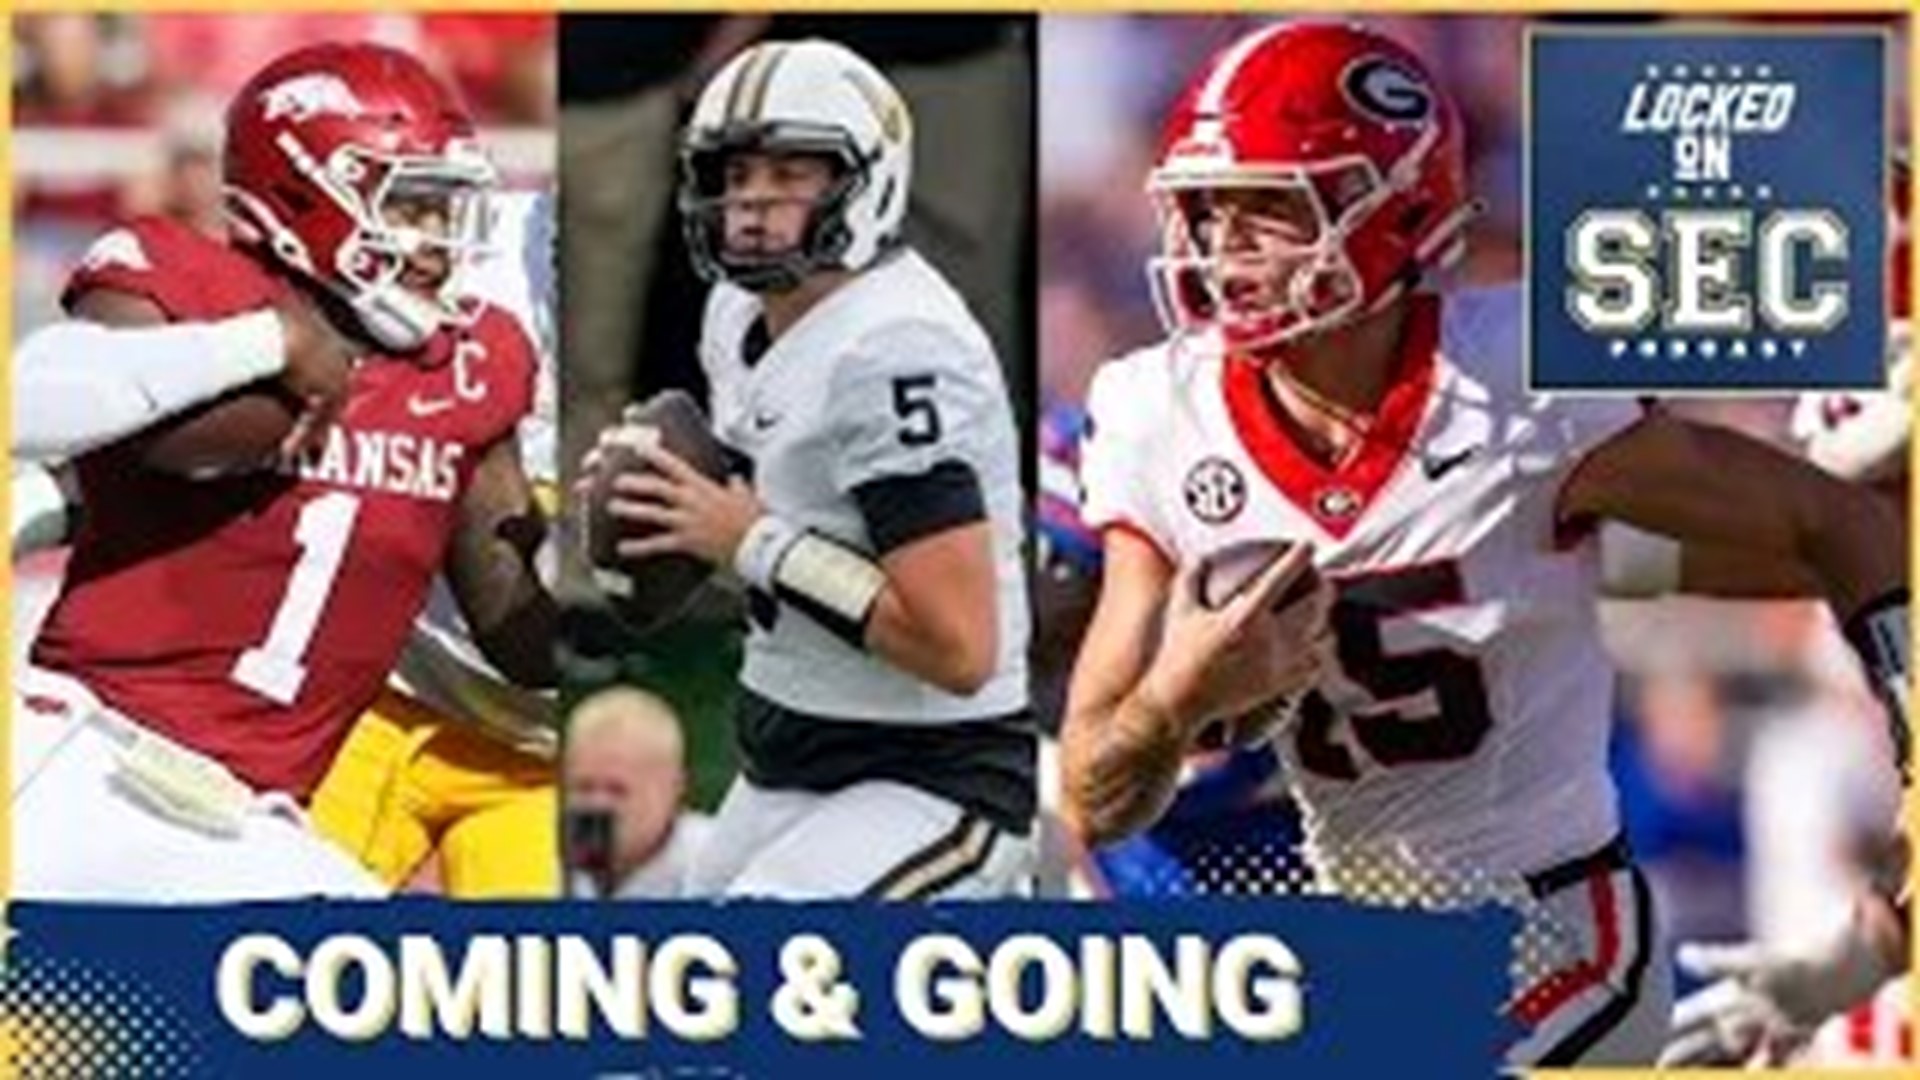 It's been a busy 24 hours in the SEC for quarterbacks – Carson Beck is back at Georgia, LSU’s Jayden Daniels opts out of their bowl game, Vandy QB AJ Swann transfers